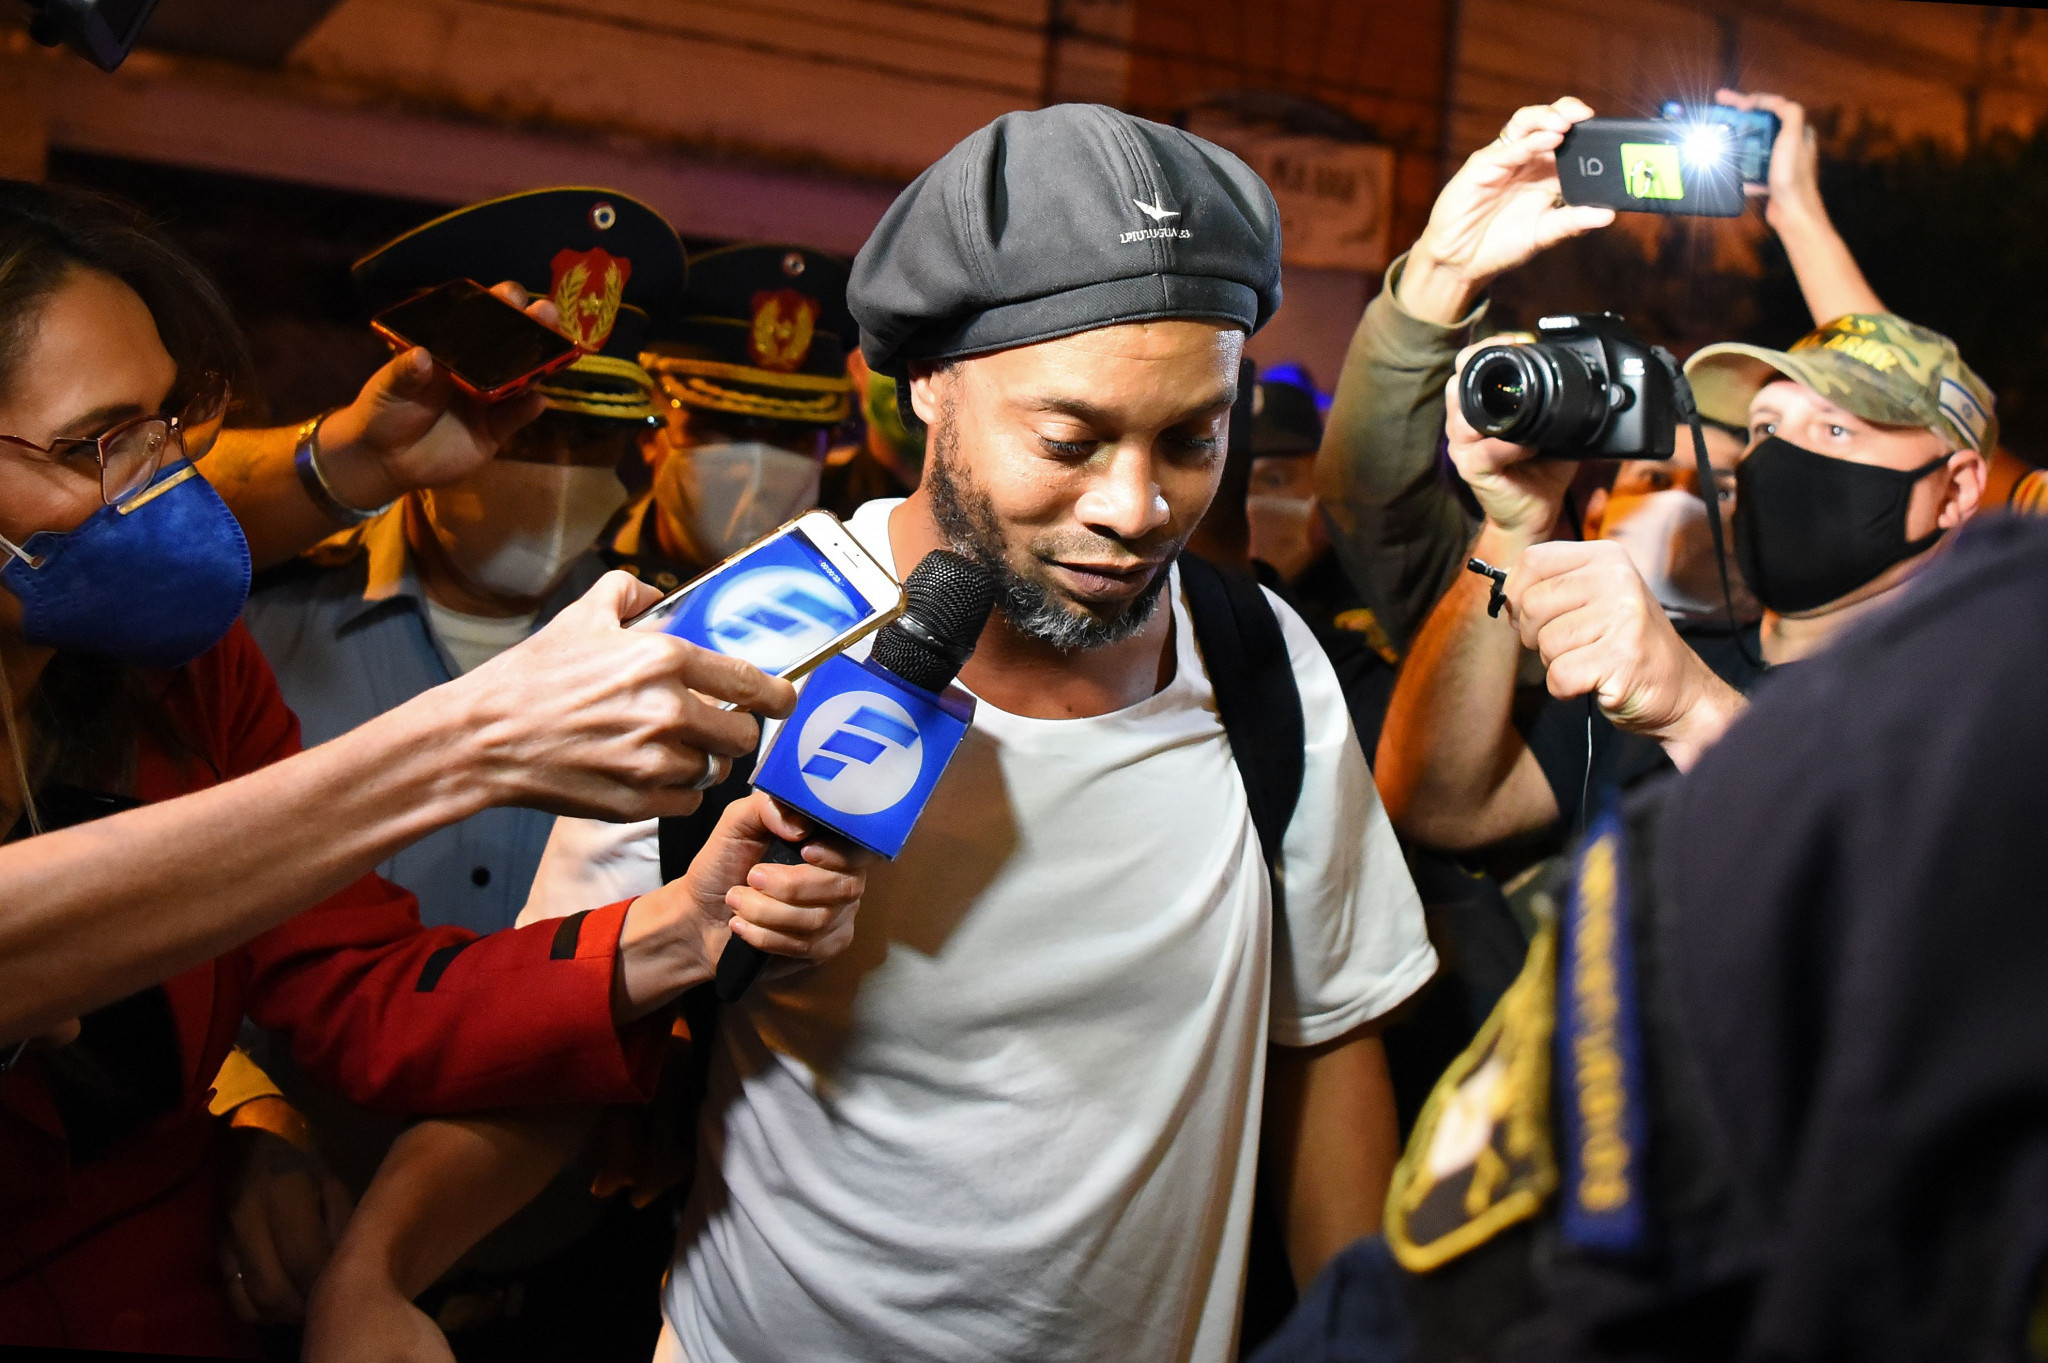 Ronaldinho released from house arrest after alleged fake passport entry into Paraguay